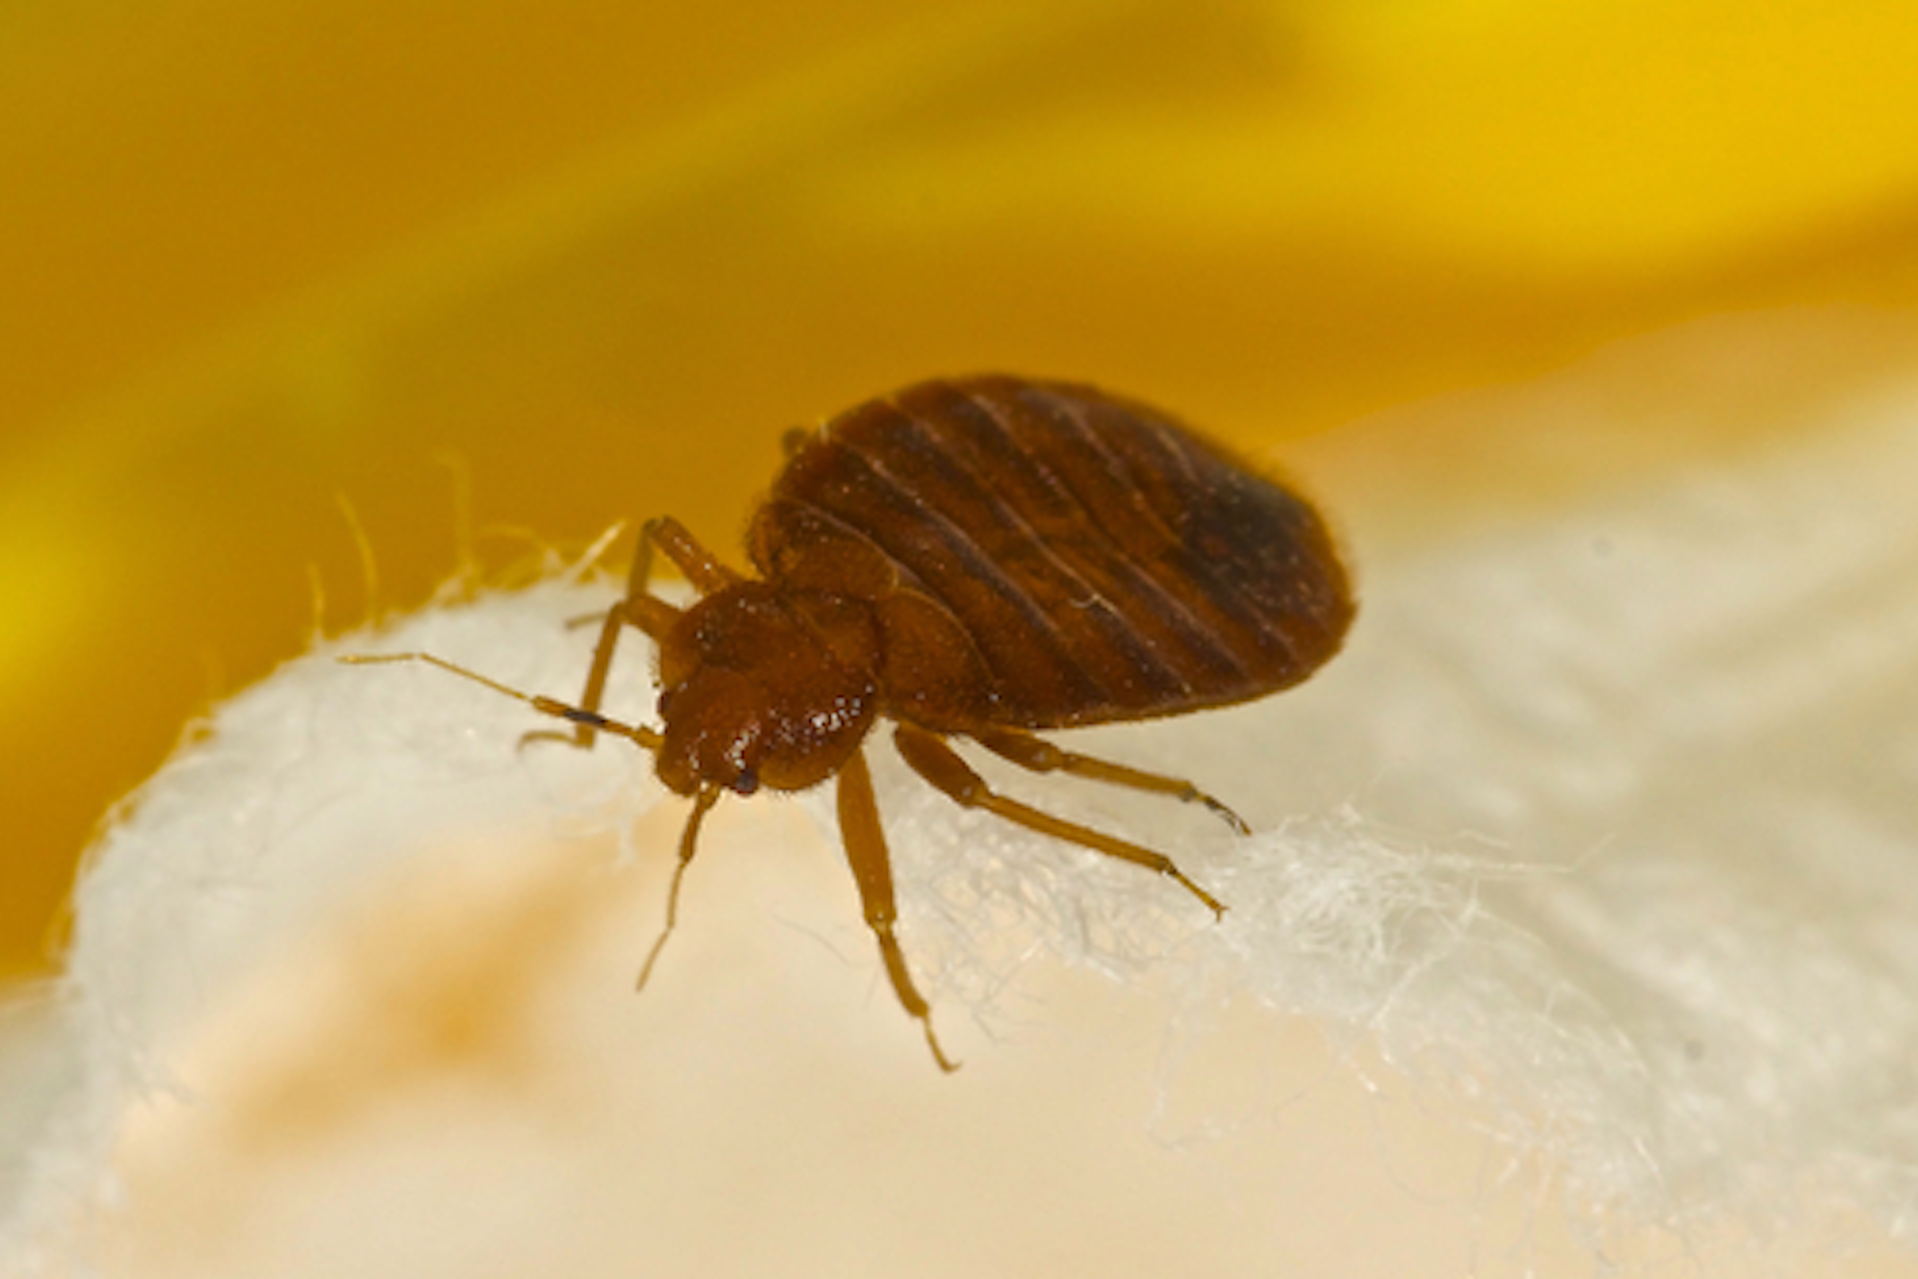 bed bugs tend to come from other infested areas